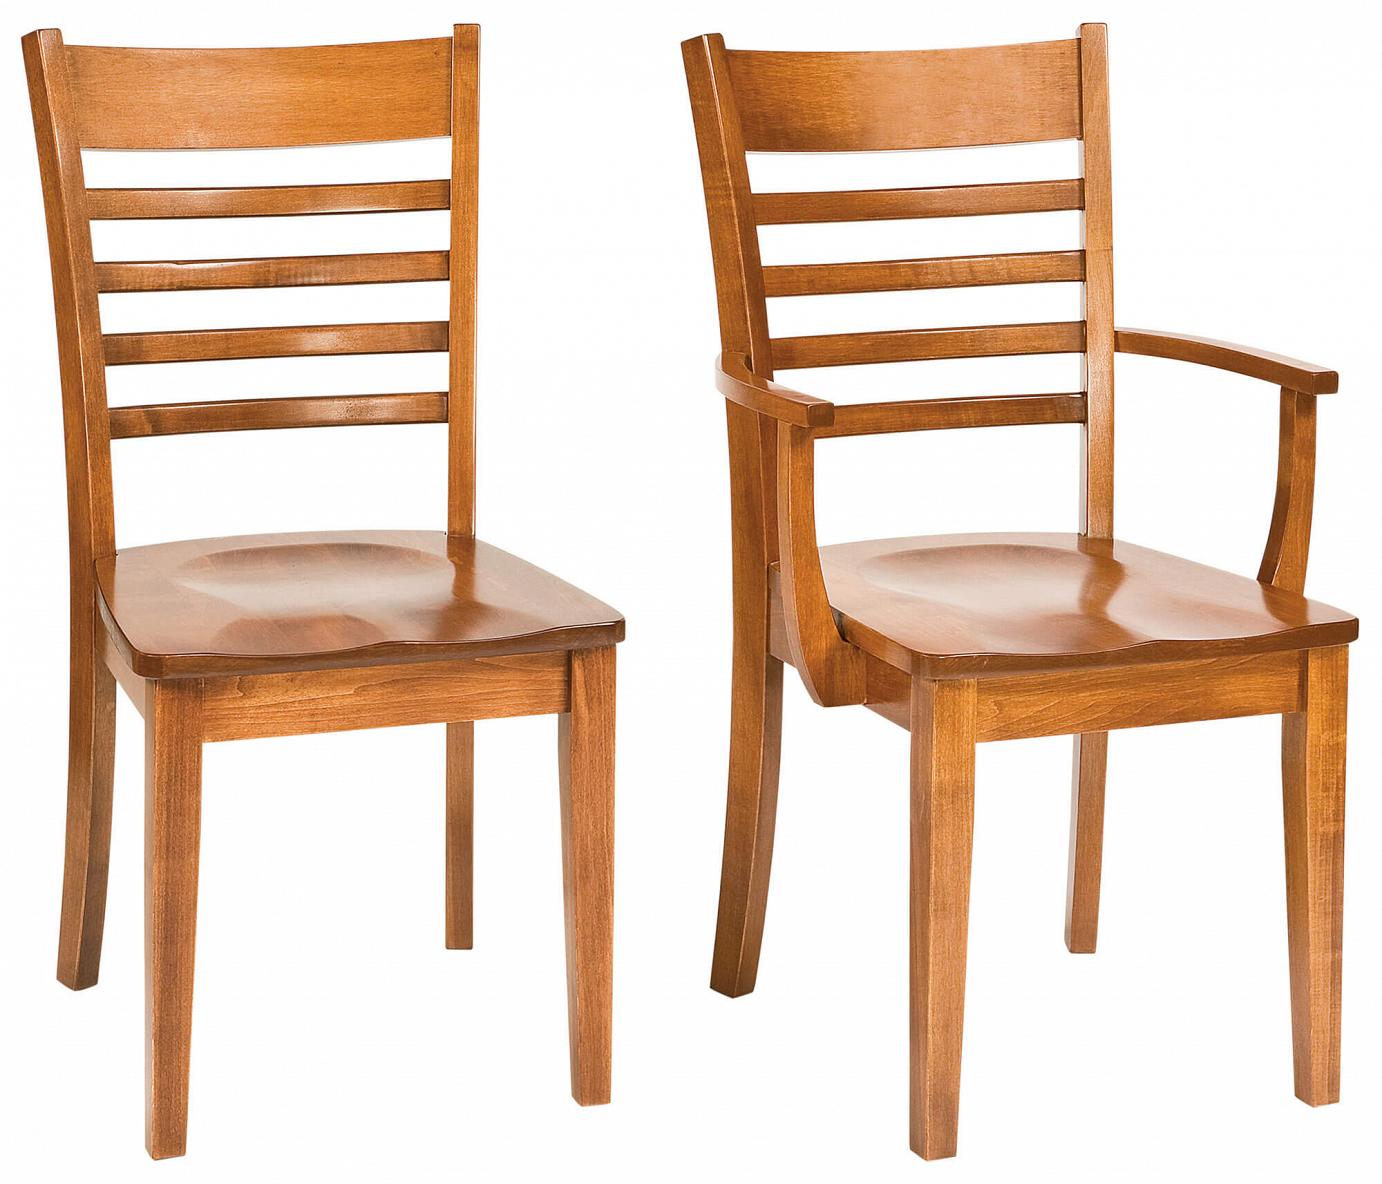 RH Yoder Louisdale Chairs